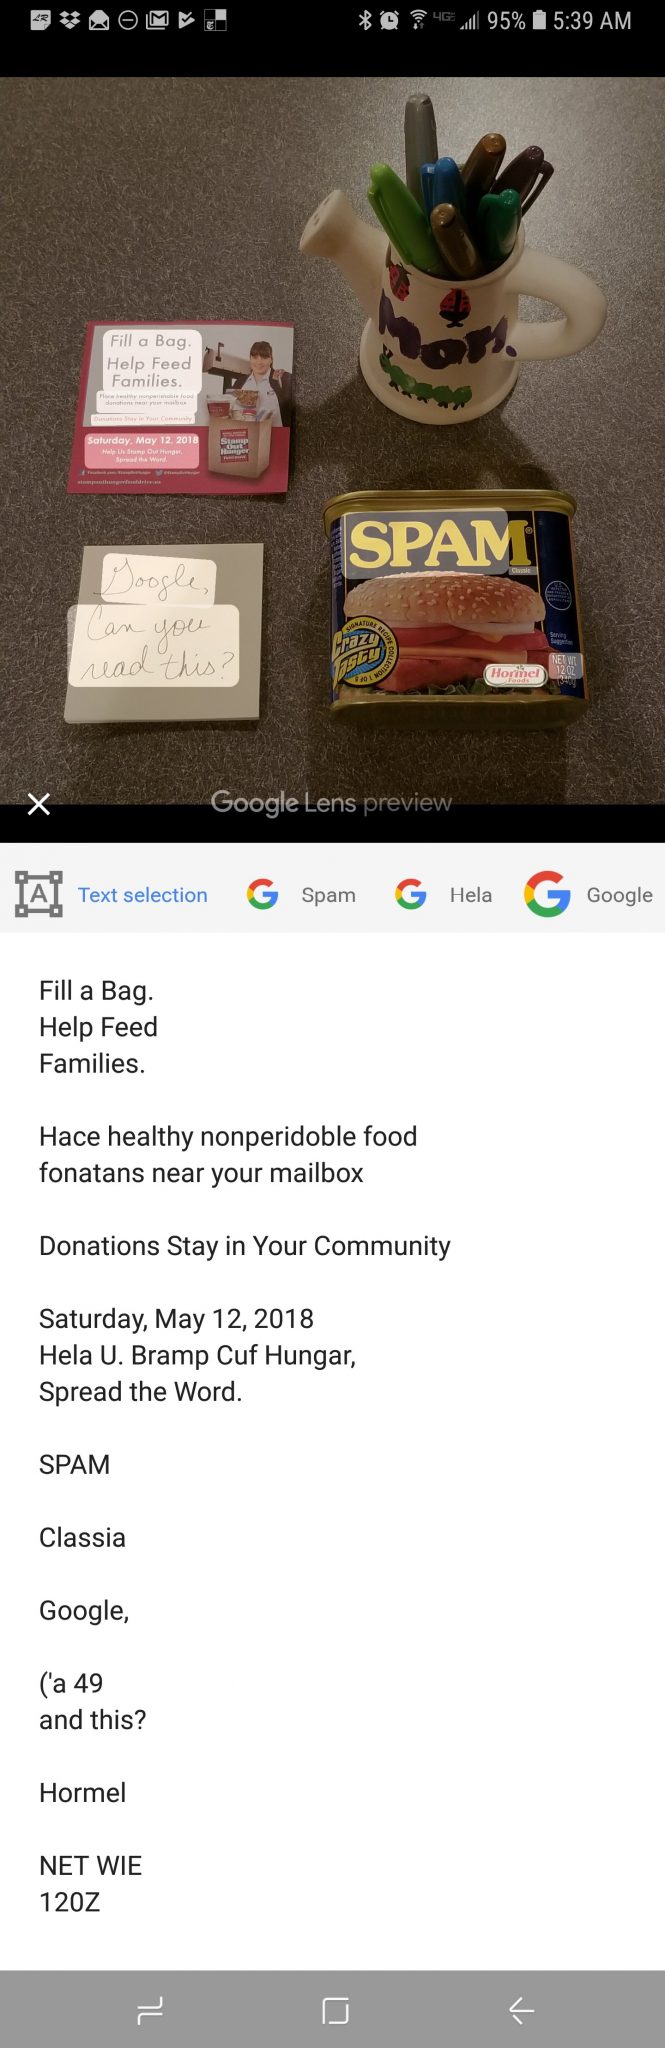 Text recognition in Google Lens is impressive but has room for improvement.